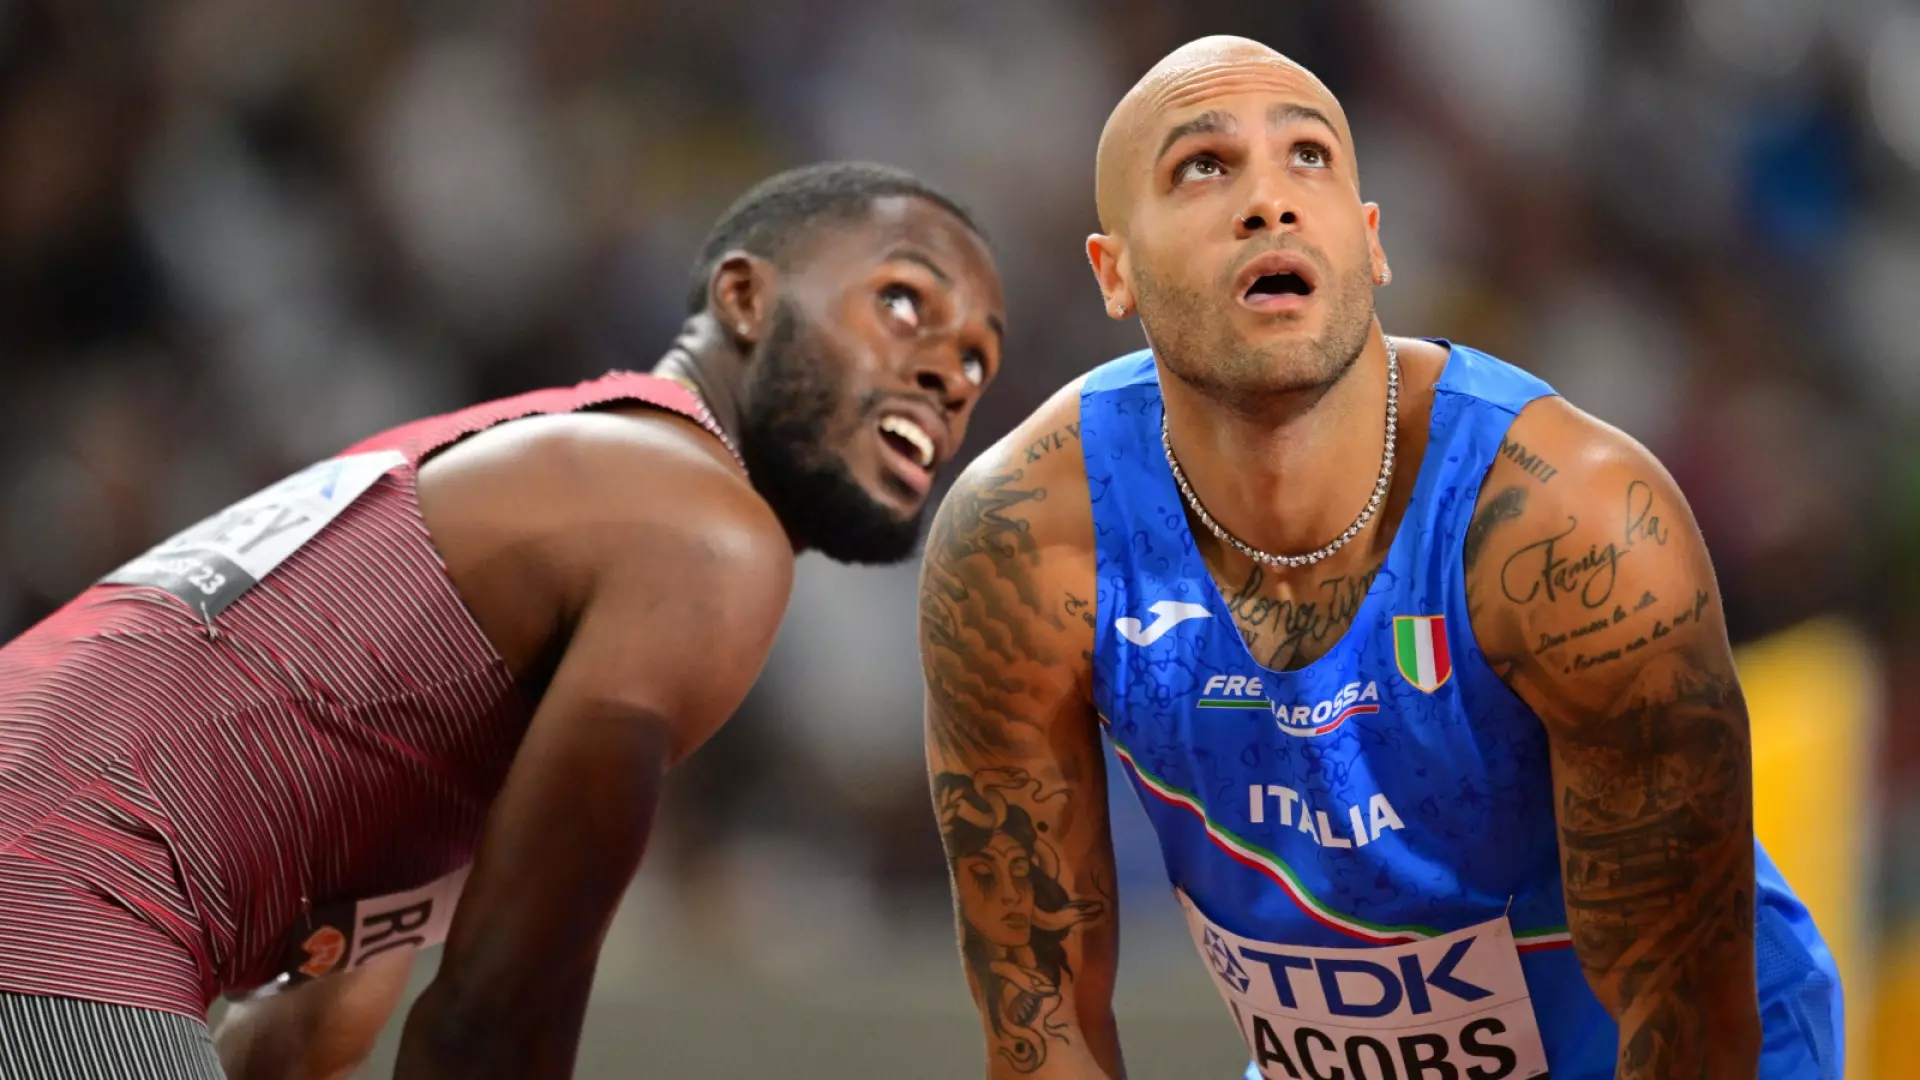 Mondiali atletica: Marcell Jacobs in semifinale, ma che paura